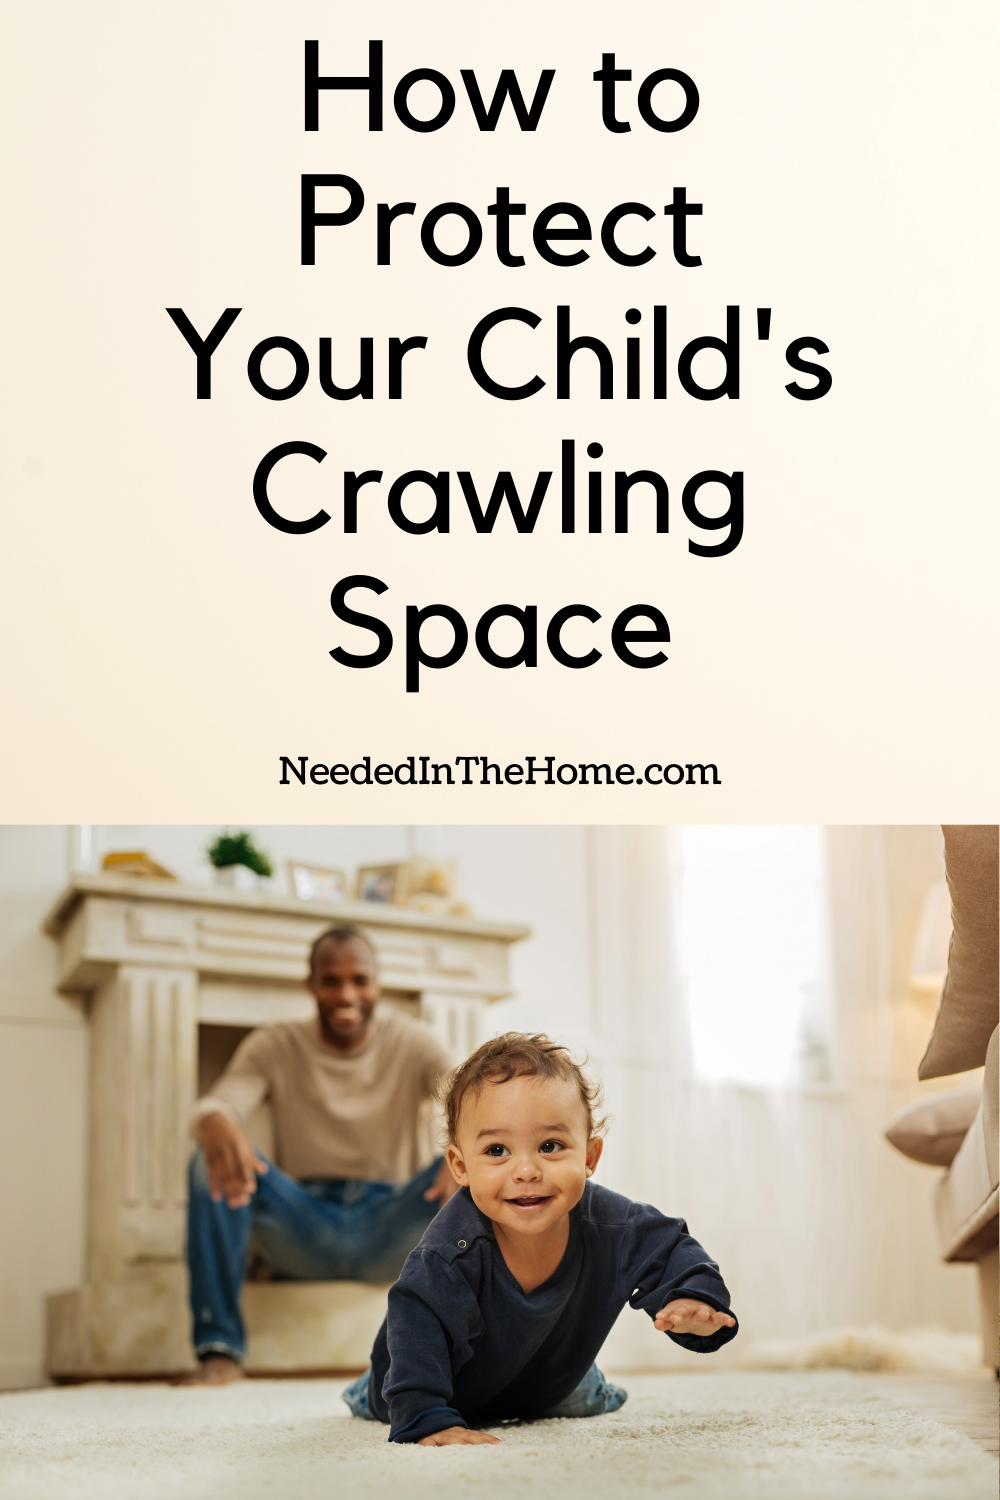 pinterest-pin-description how to protect your child's crawling space image toddler crawling on floor near Dad sitting on fireplace ledge to prevent bumps neededinthehome